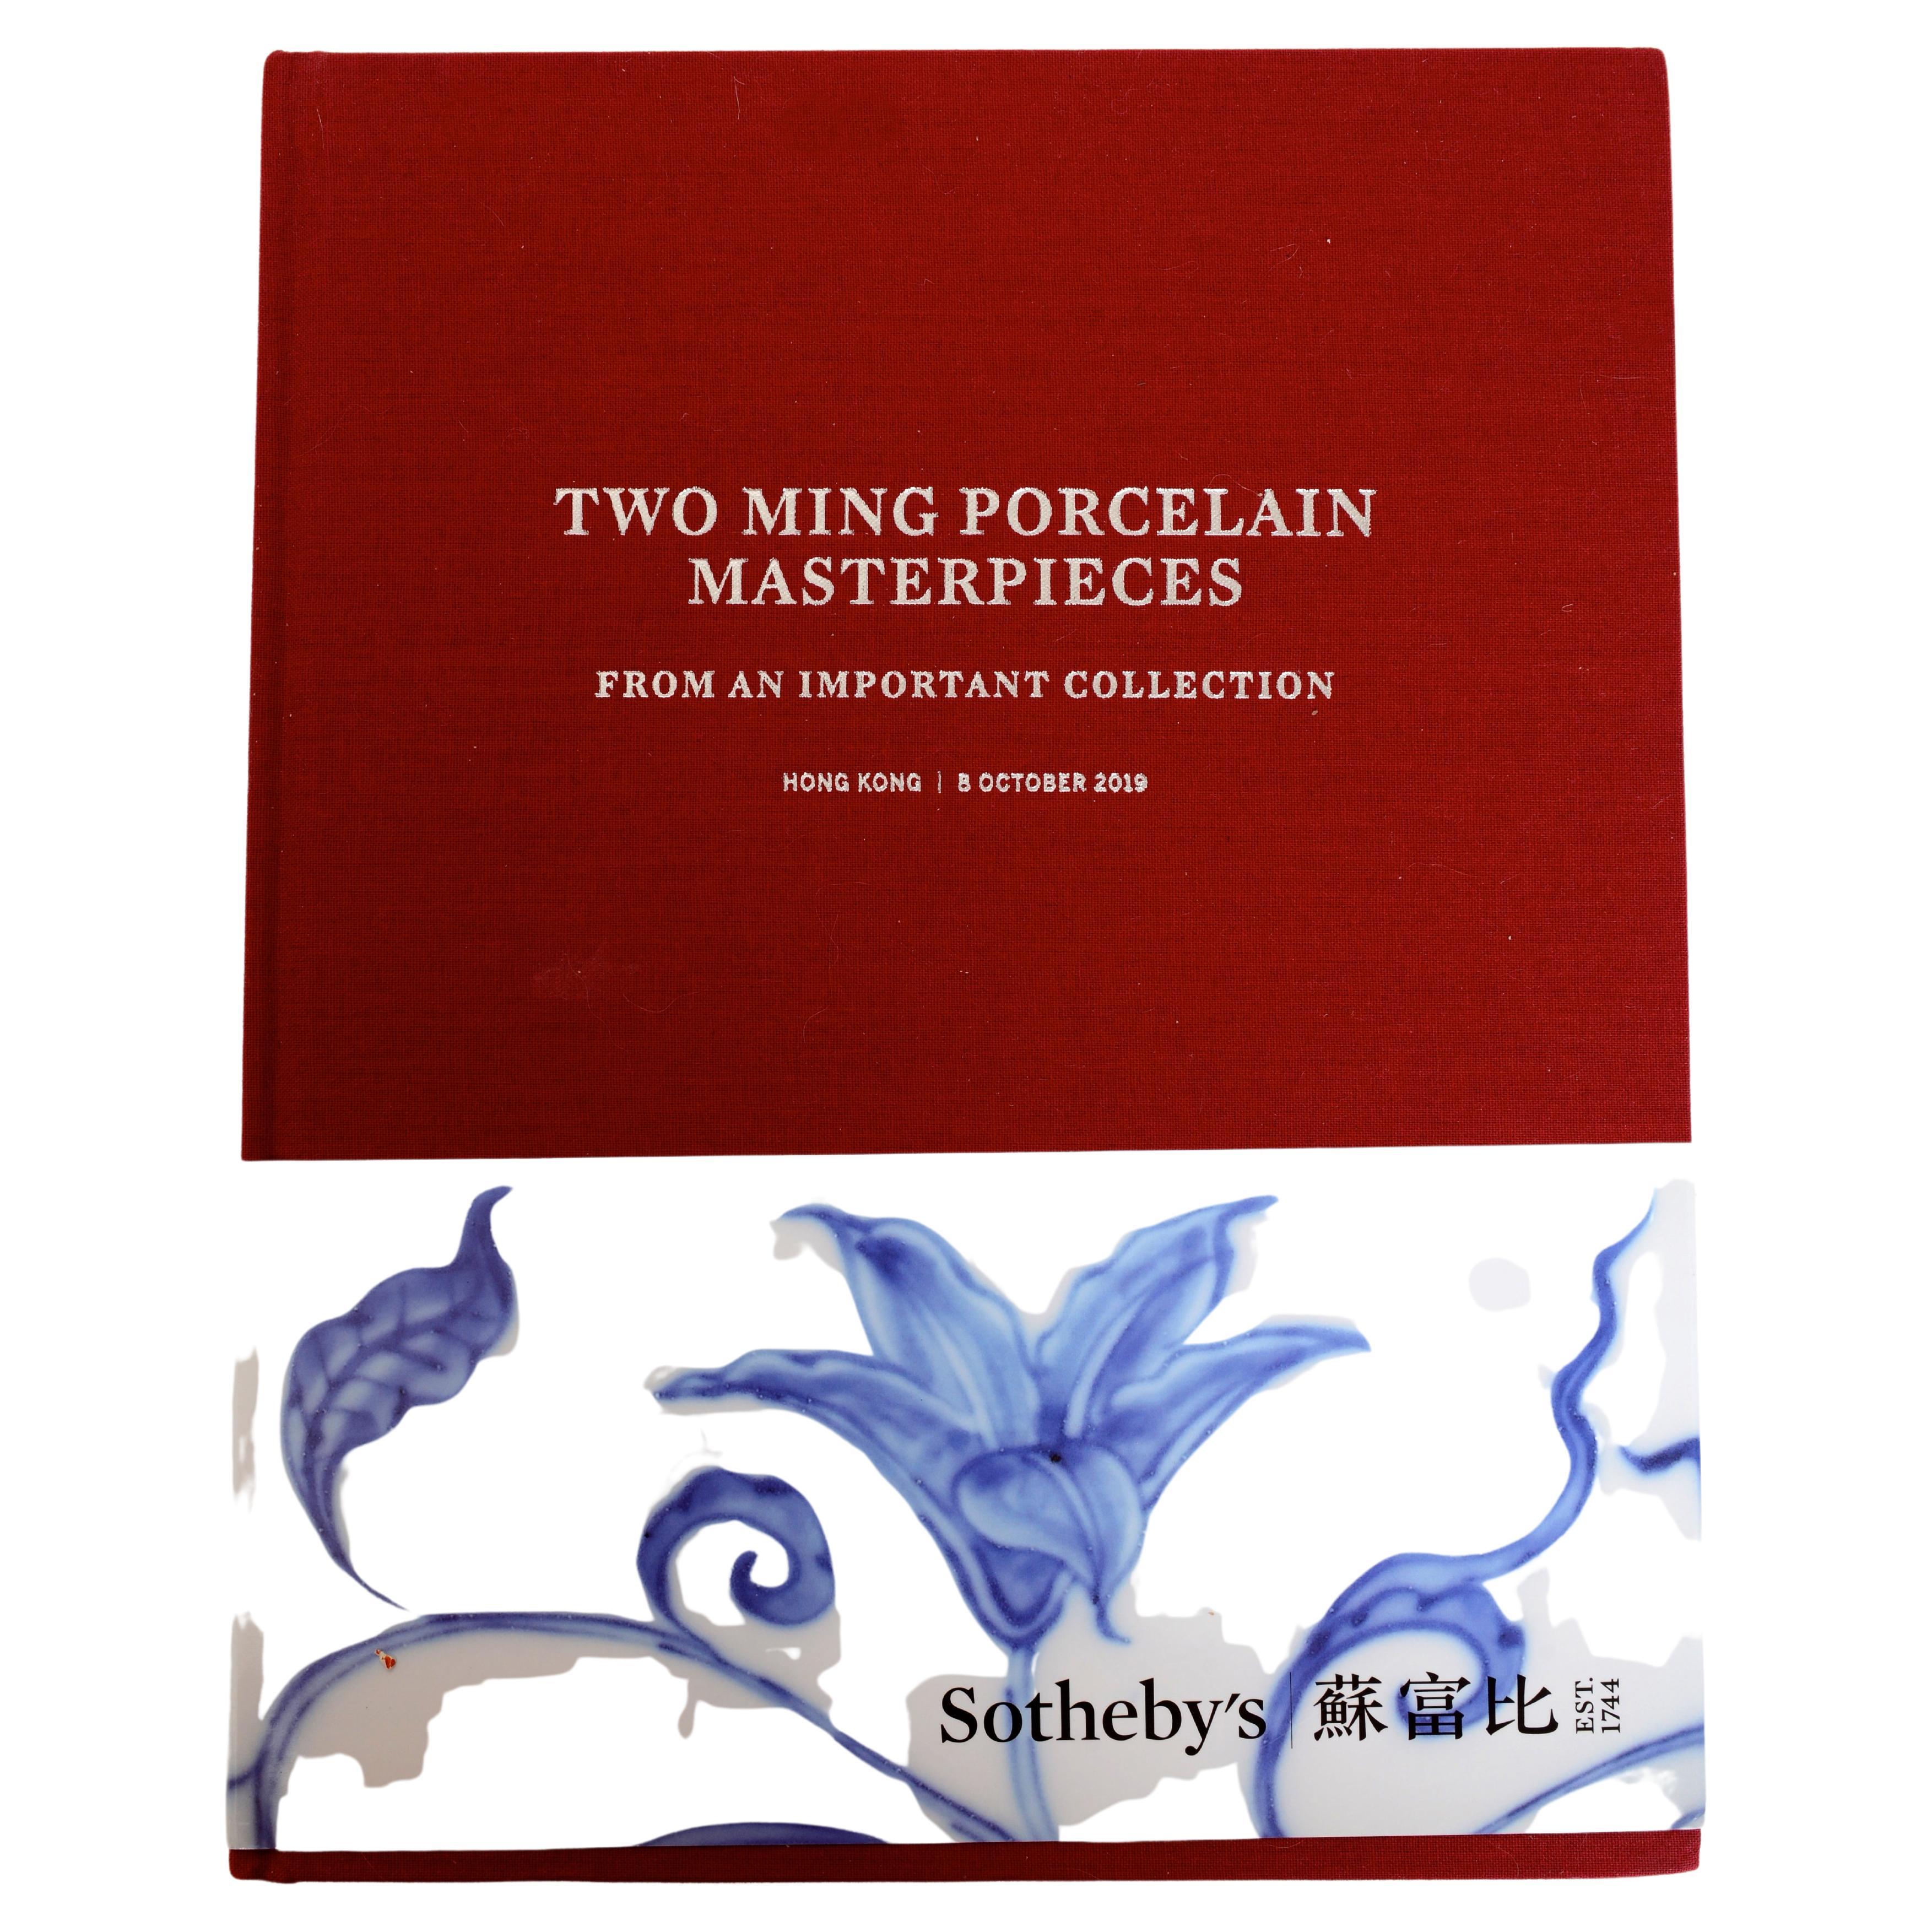 Two Ming Porcelain Masterpieces from an Important Collection Sotheby's Hong Kong